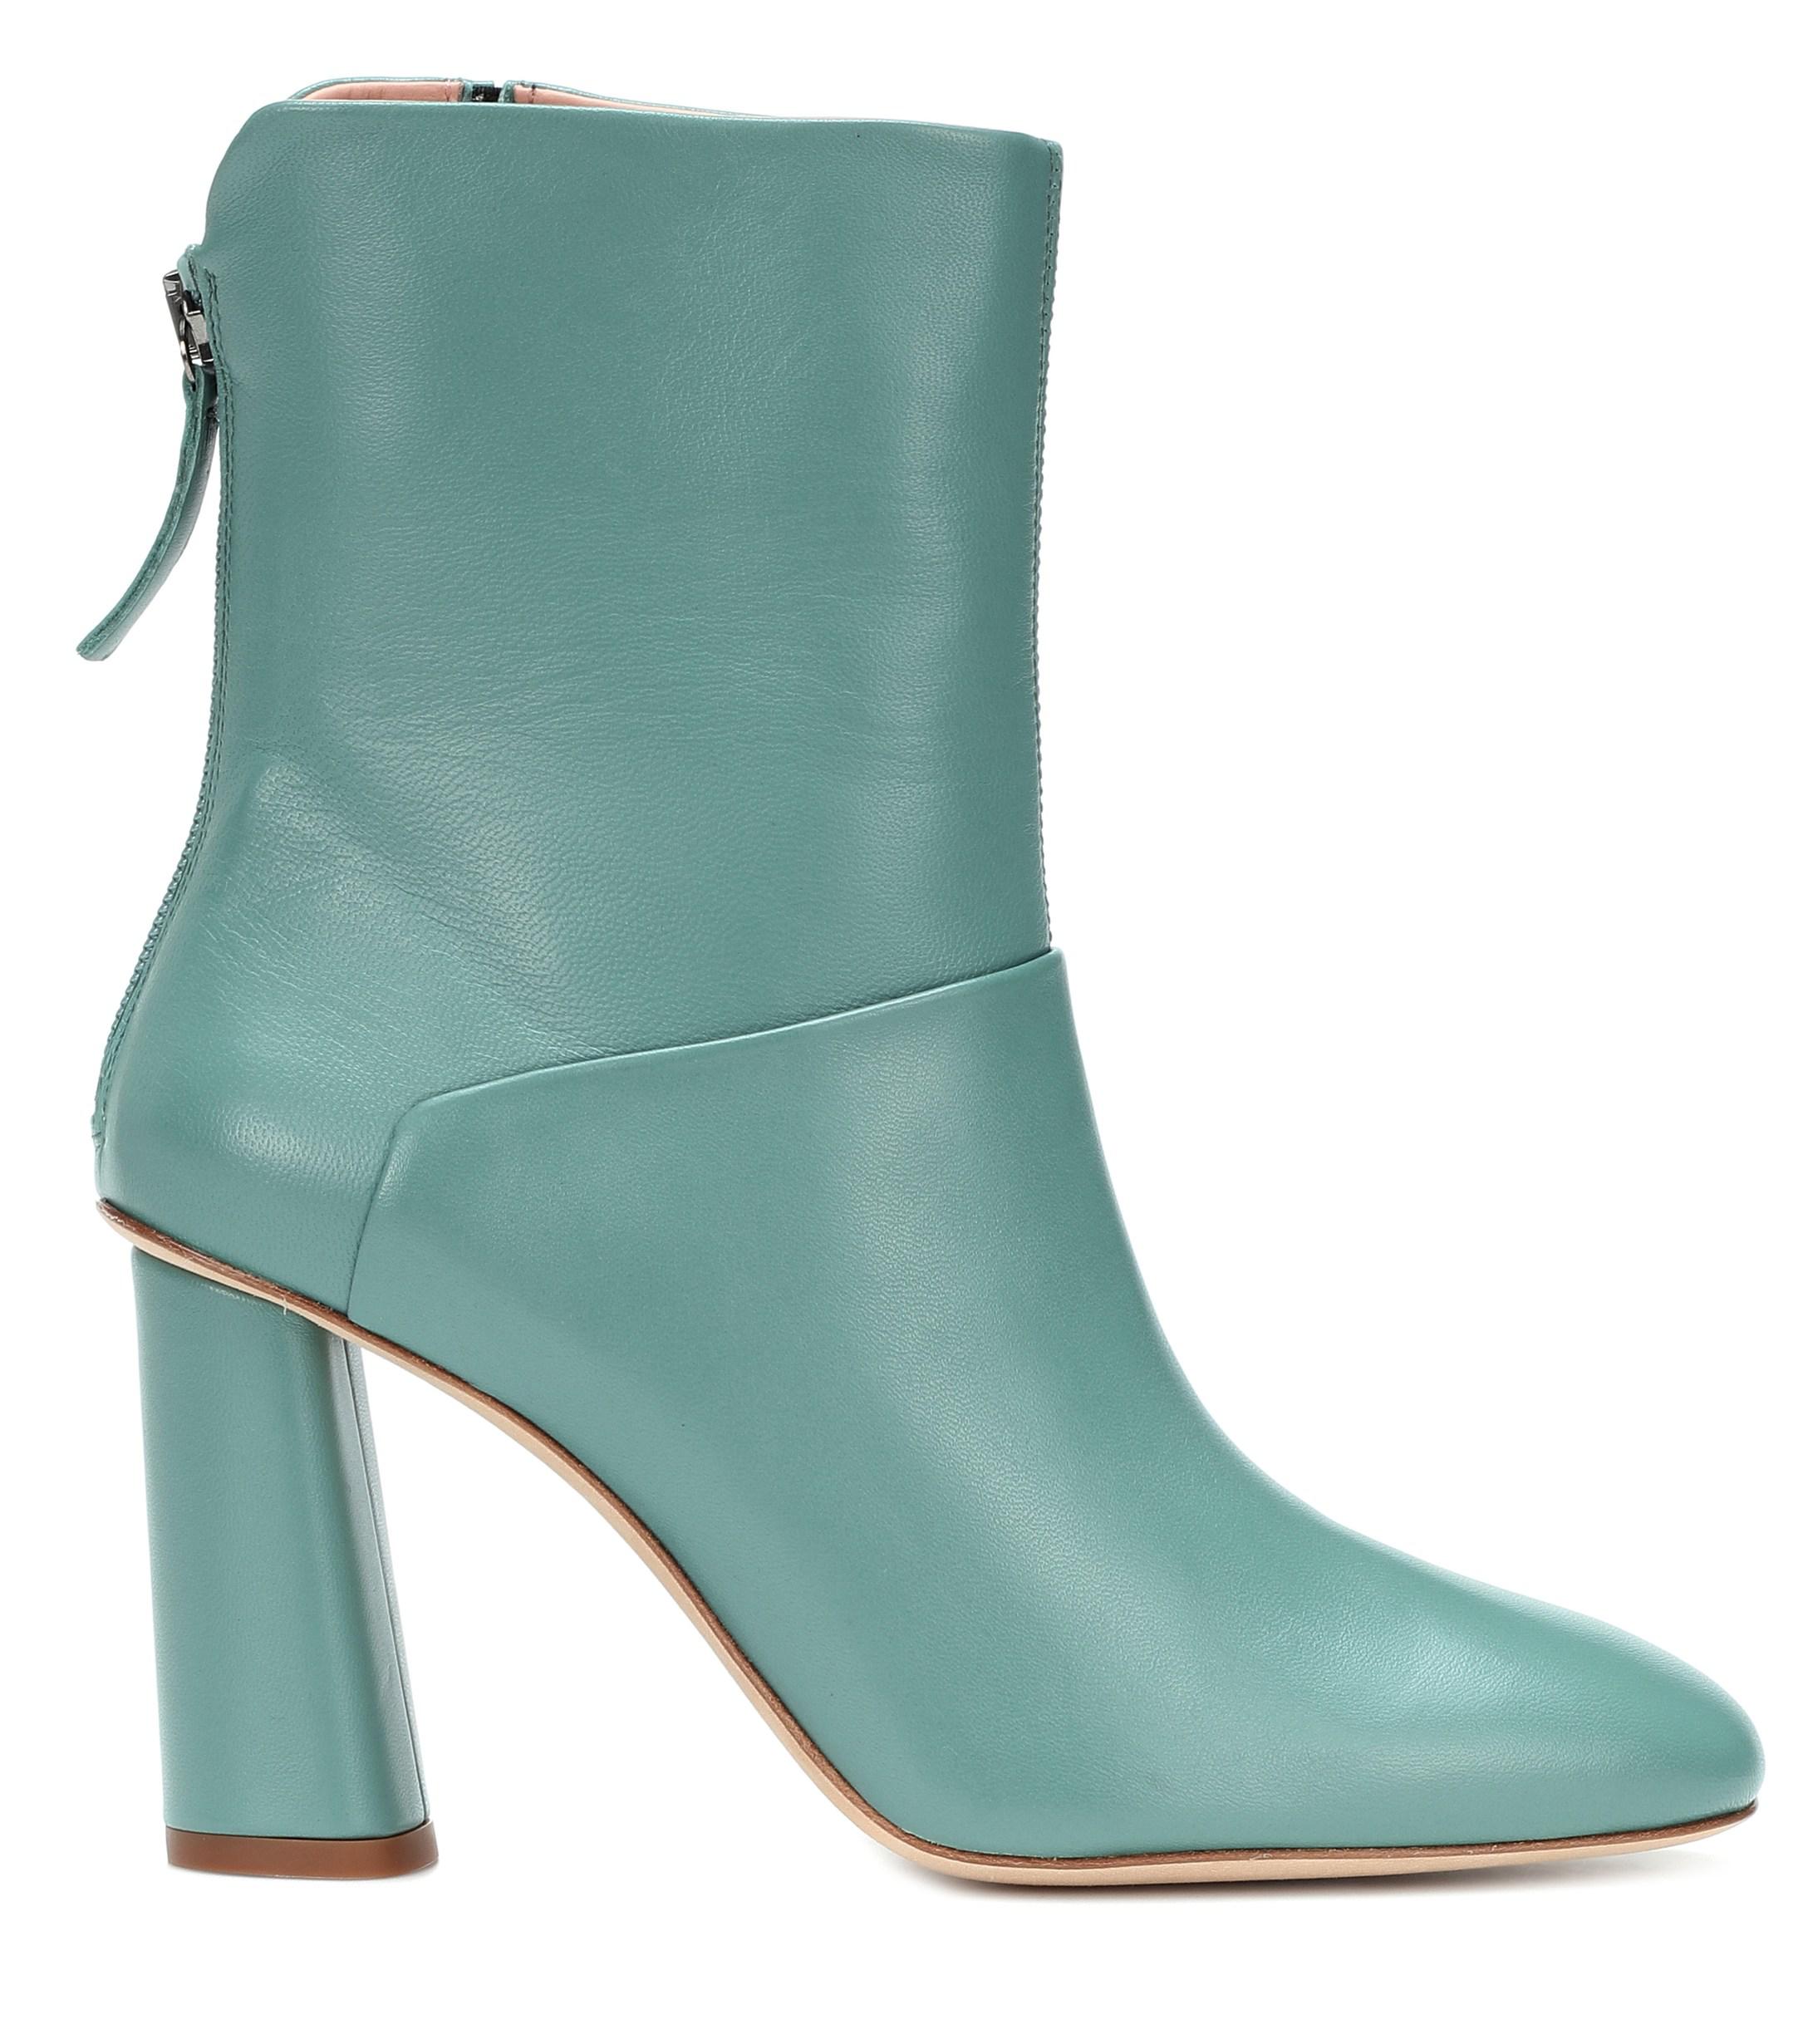 Acne Studios Leather Ankle Boots in Green - Lyst